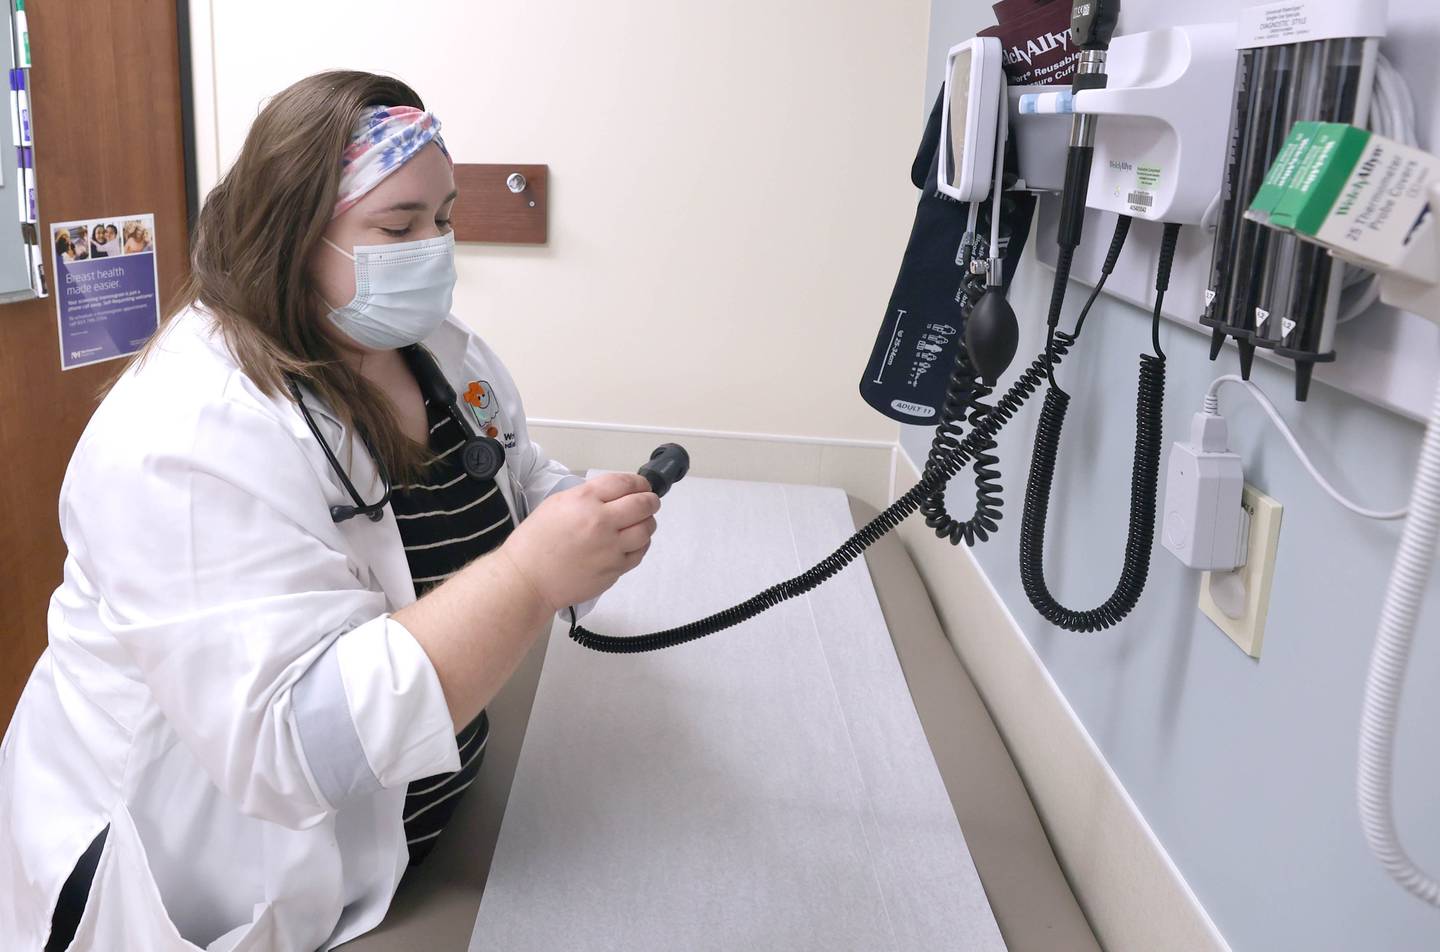 Pediatrician Dr. Blair Wright sets up an examination room for a patient visit Friday, Nov. 4, 2022, at Northwestern Medicine Valley West Hospital in Sandwich.